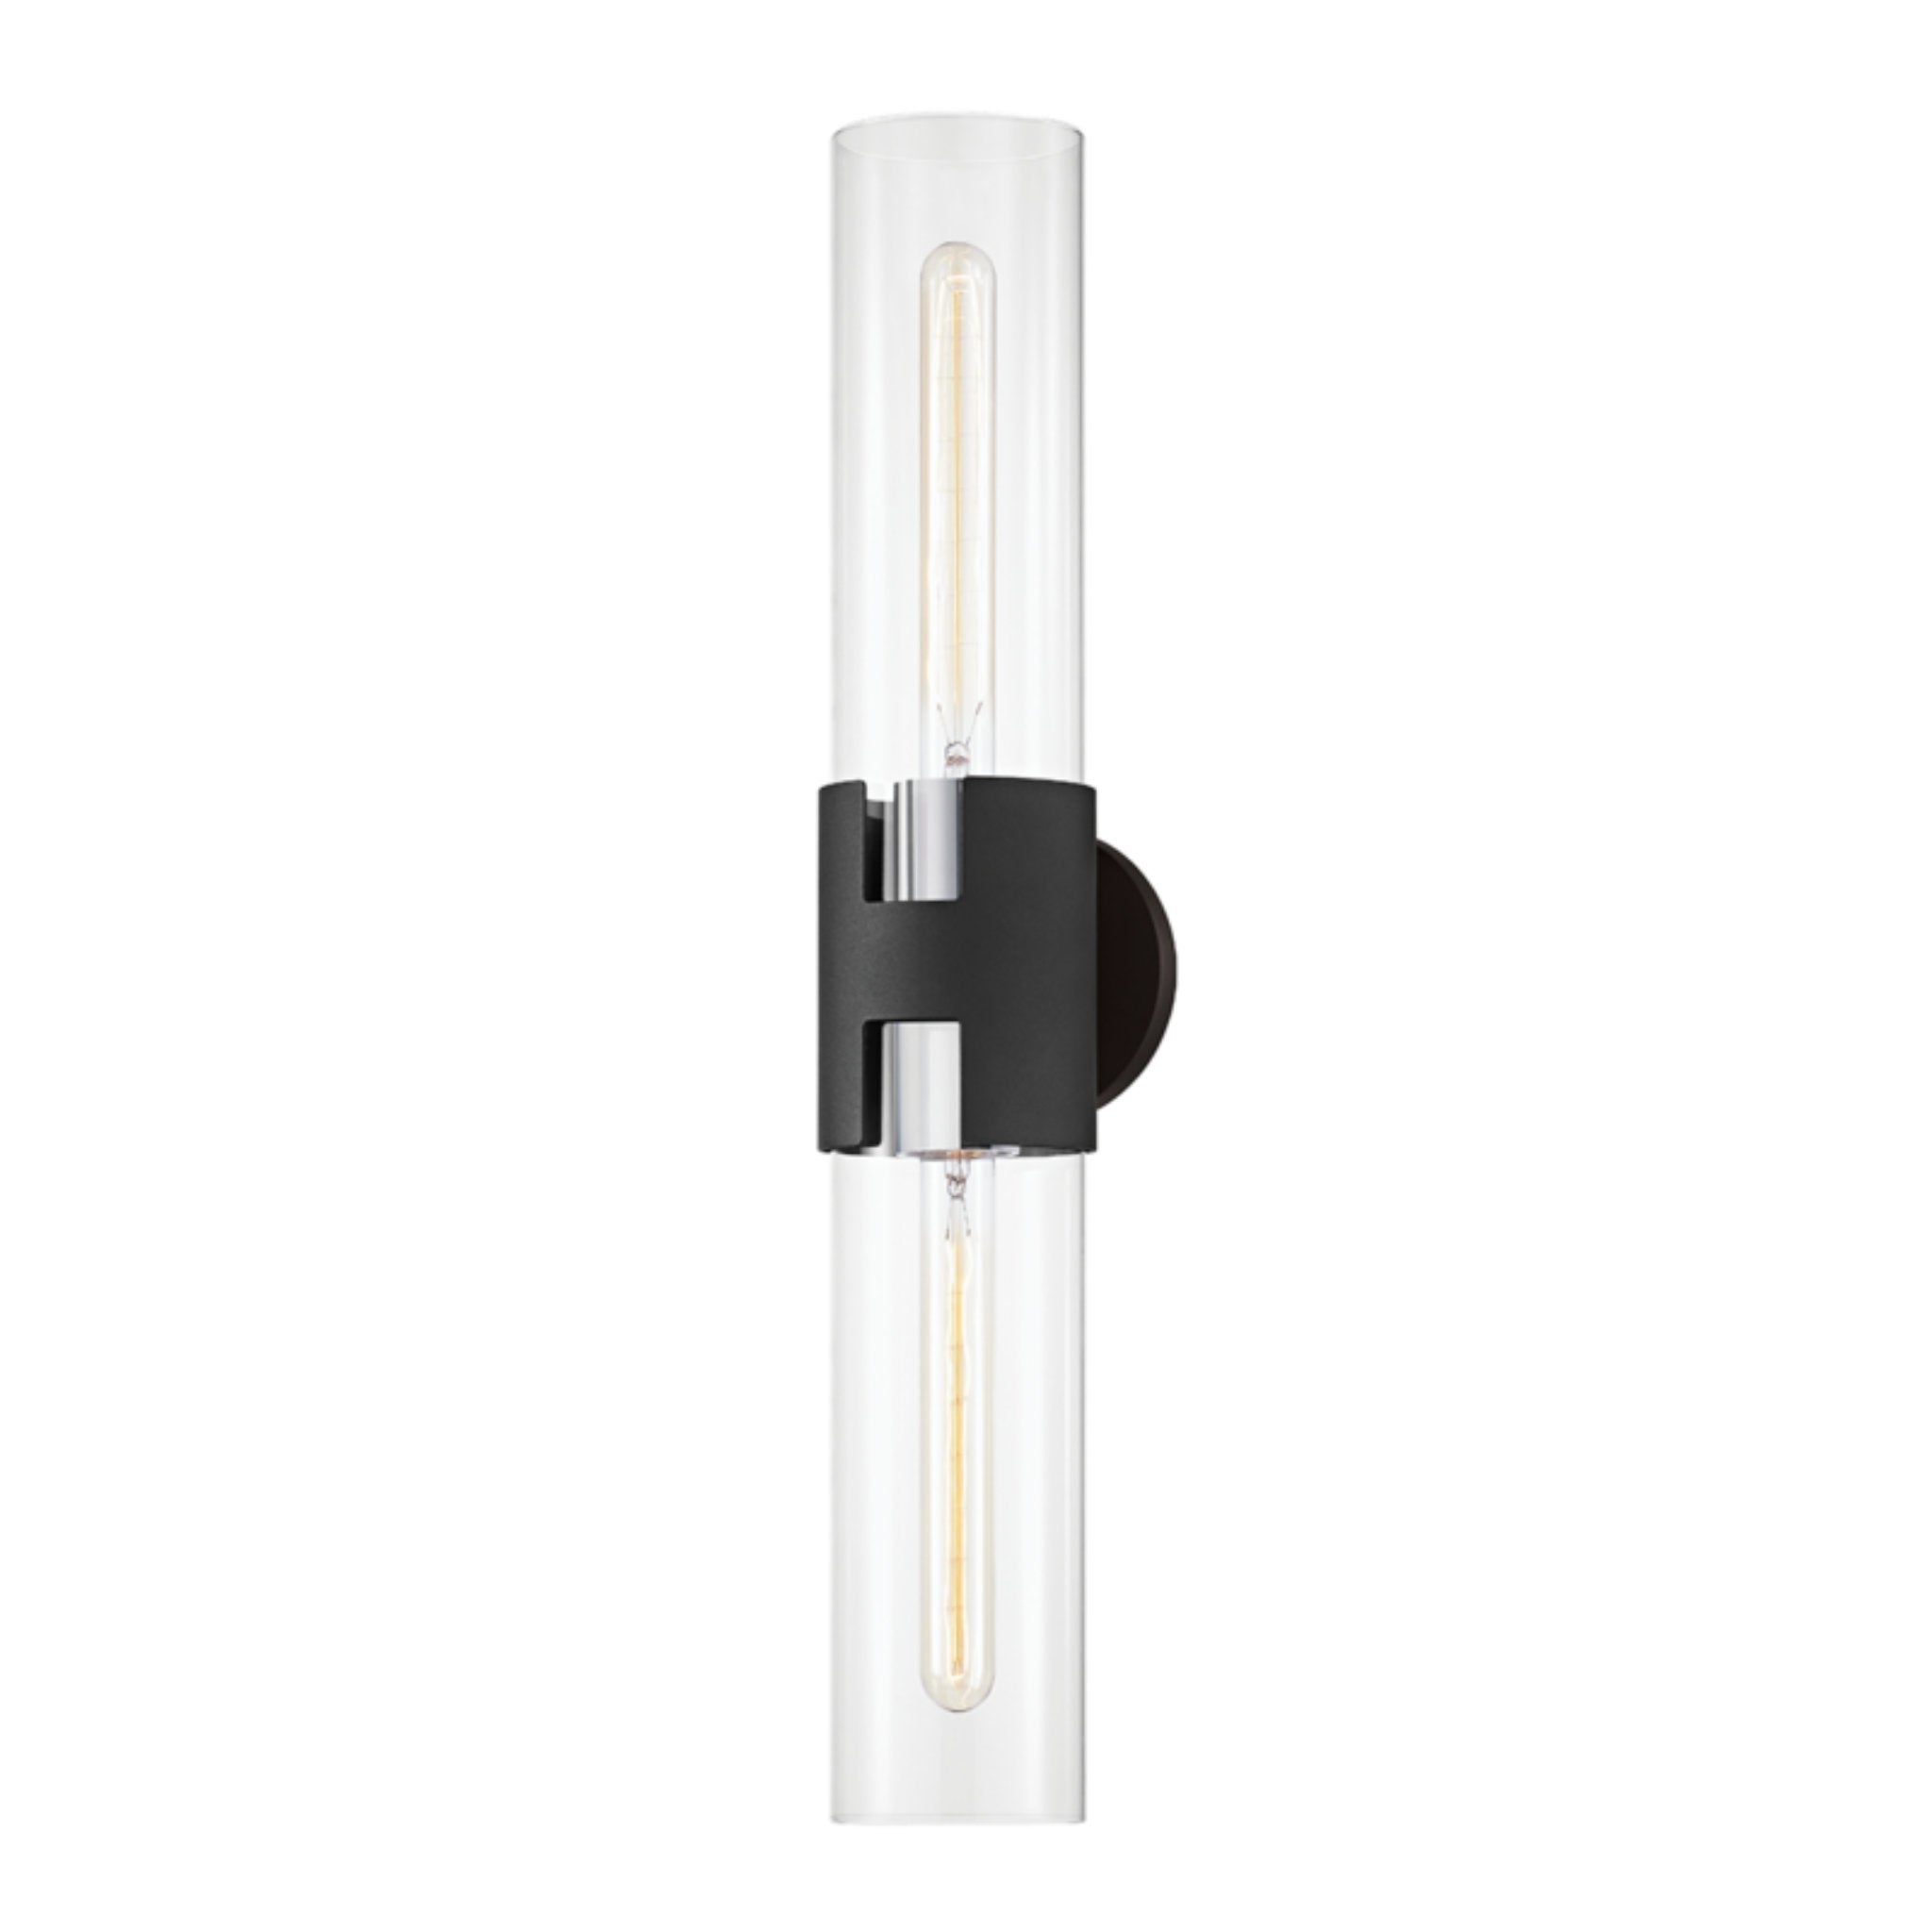 Amado 2 Light Wall Sconce in Polished Nickel/Textured Black